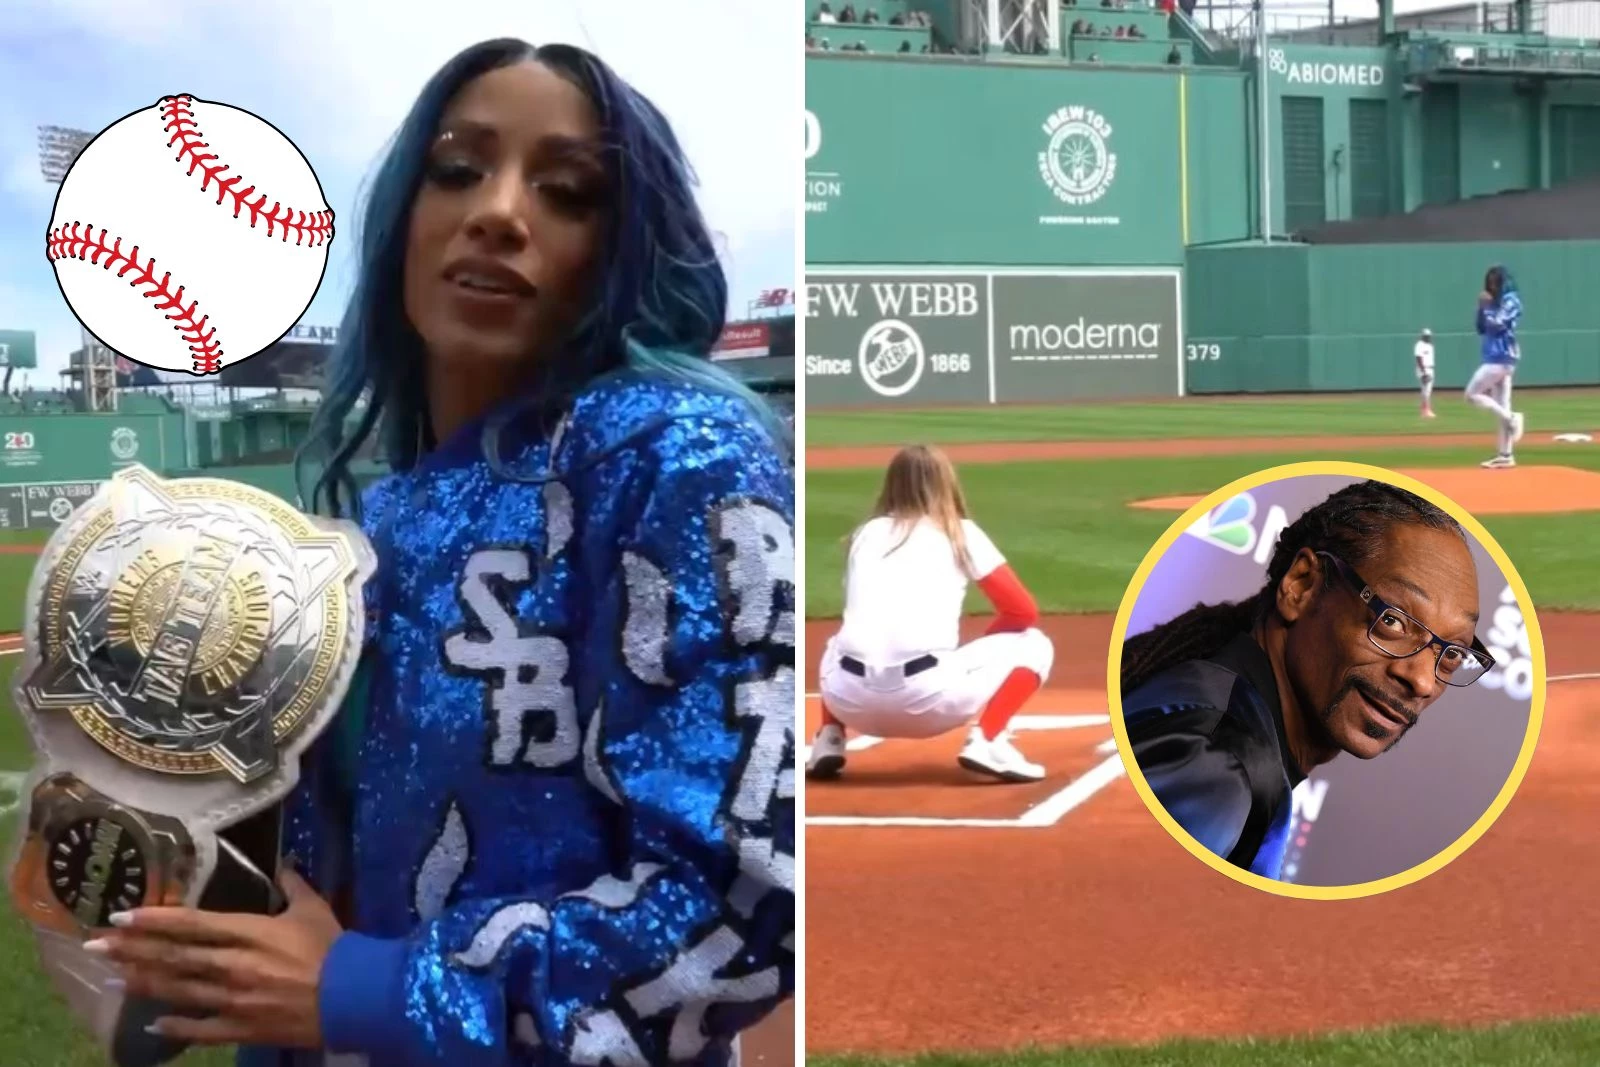 WWE Champ Throws Out First Pitch at Fenway, Calls Out Snoop Dogg